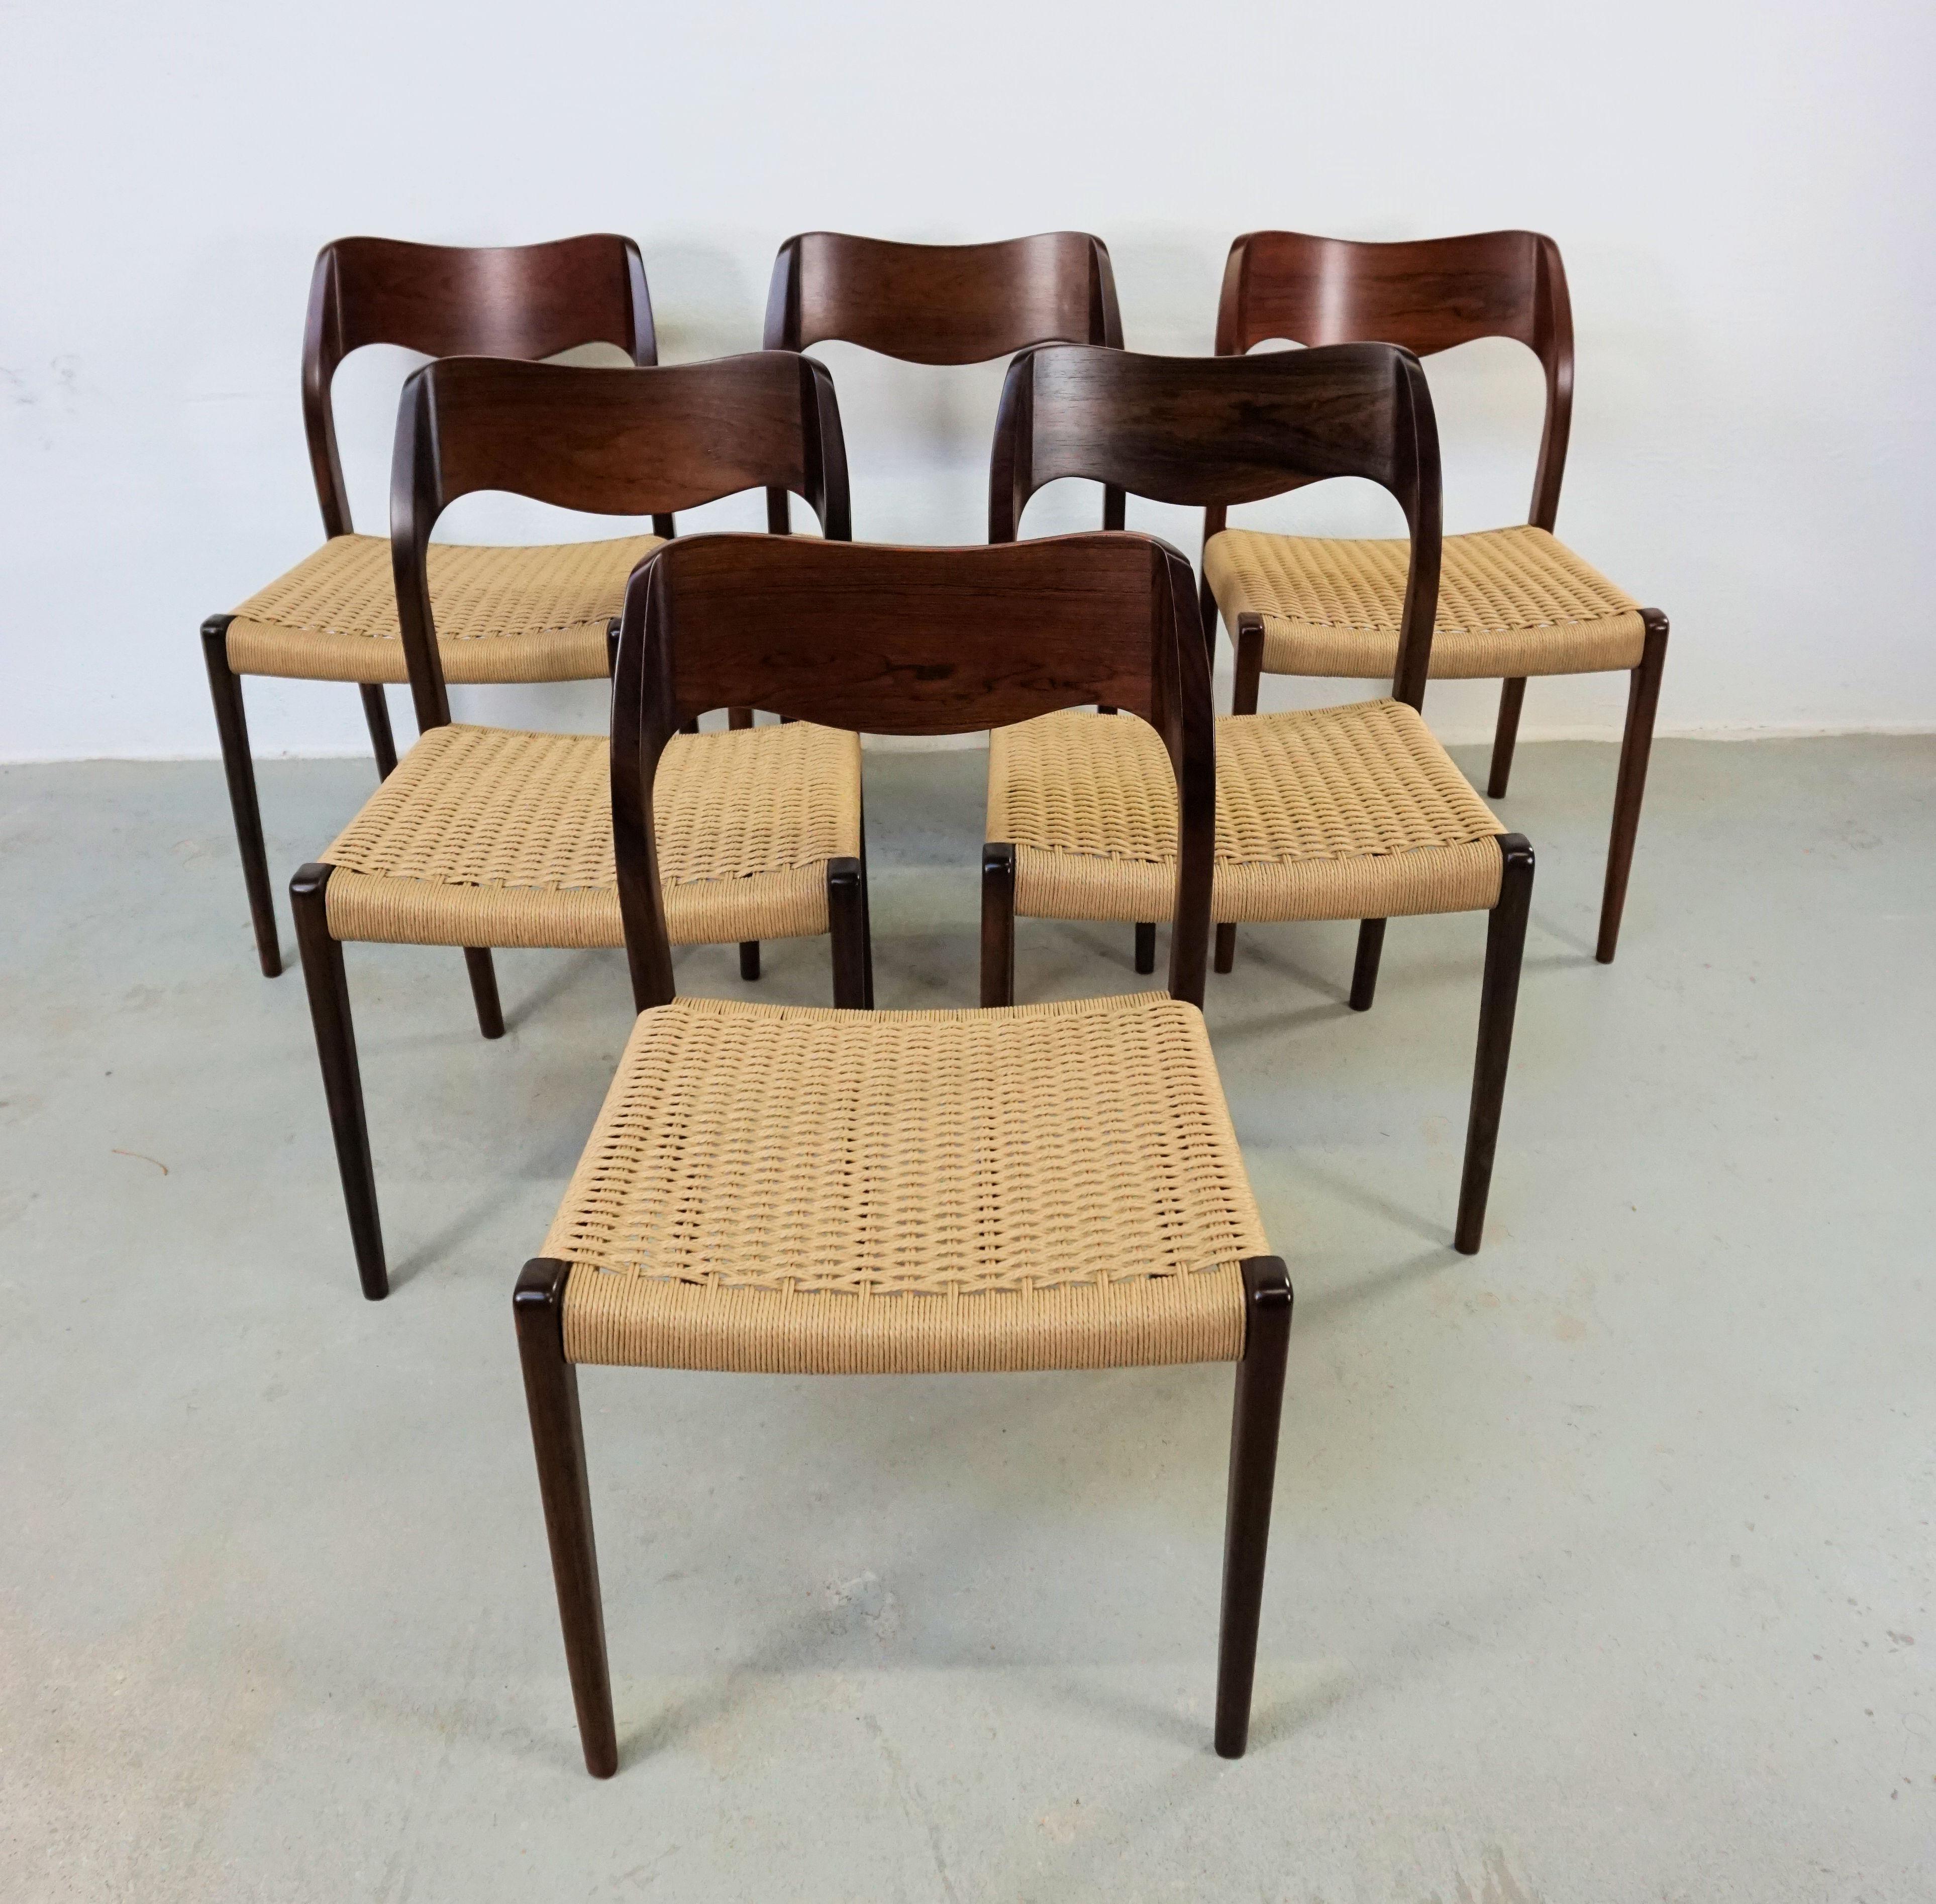 1960s Niels Otto Møller six rosewood dining chairs with new paper cord seats designed by Niels Otto Møller in 1951.

The chairs feature a solid frame and veneered backrest in rosewood designed with straight lined legs and an elegant organic shaped